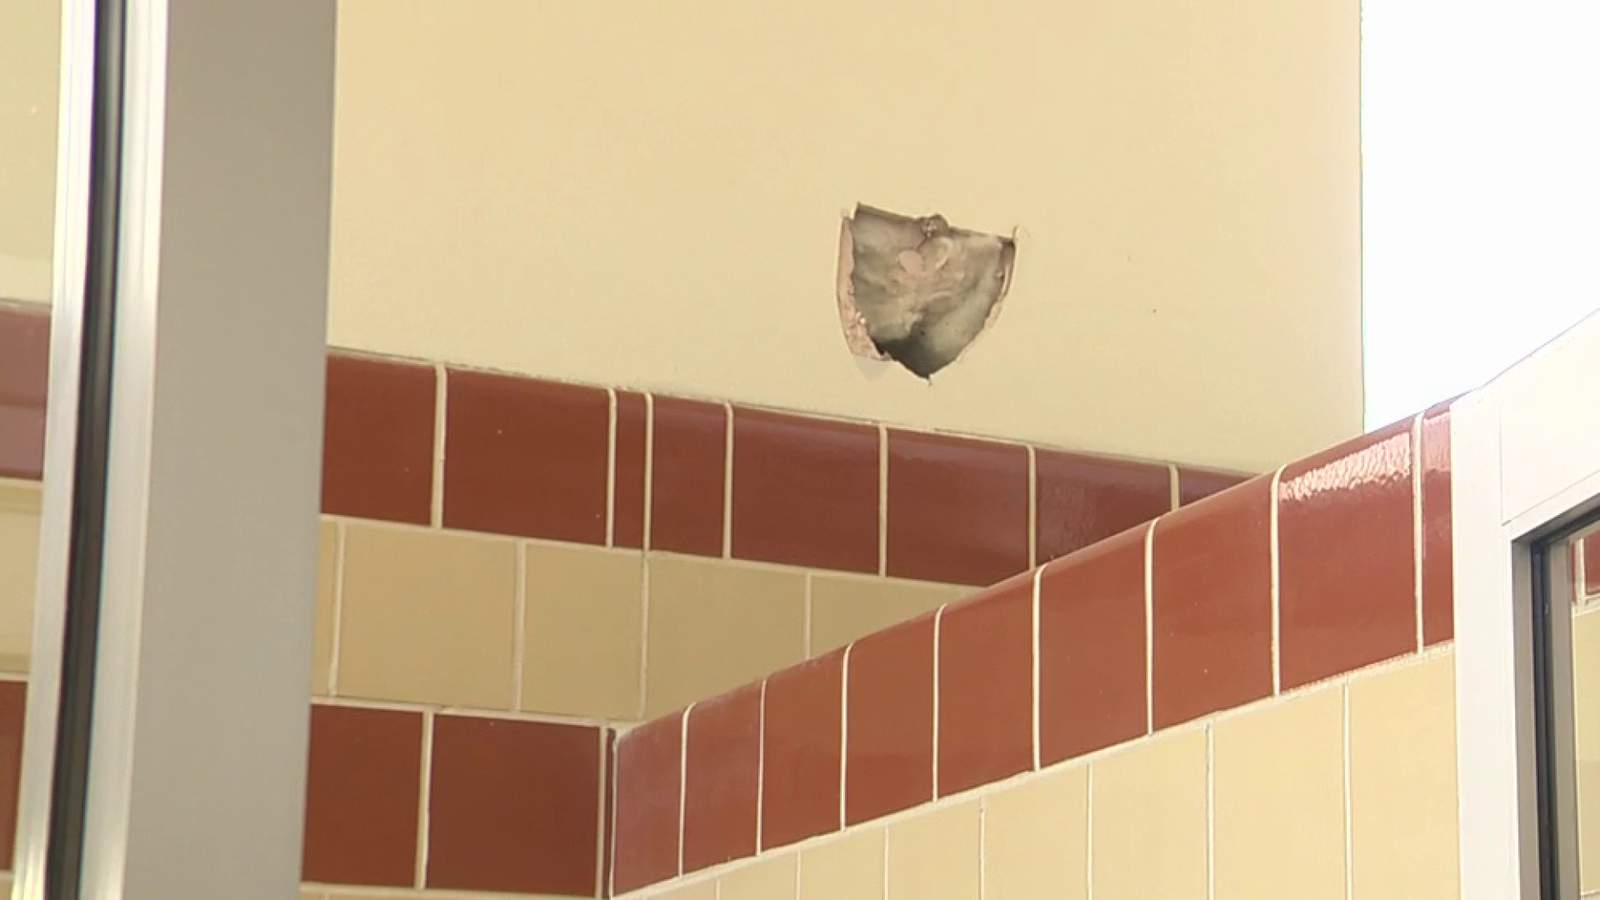 San Antonio Humane Society campuses need repair after several pipes burst due to winter storm